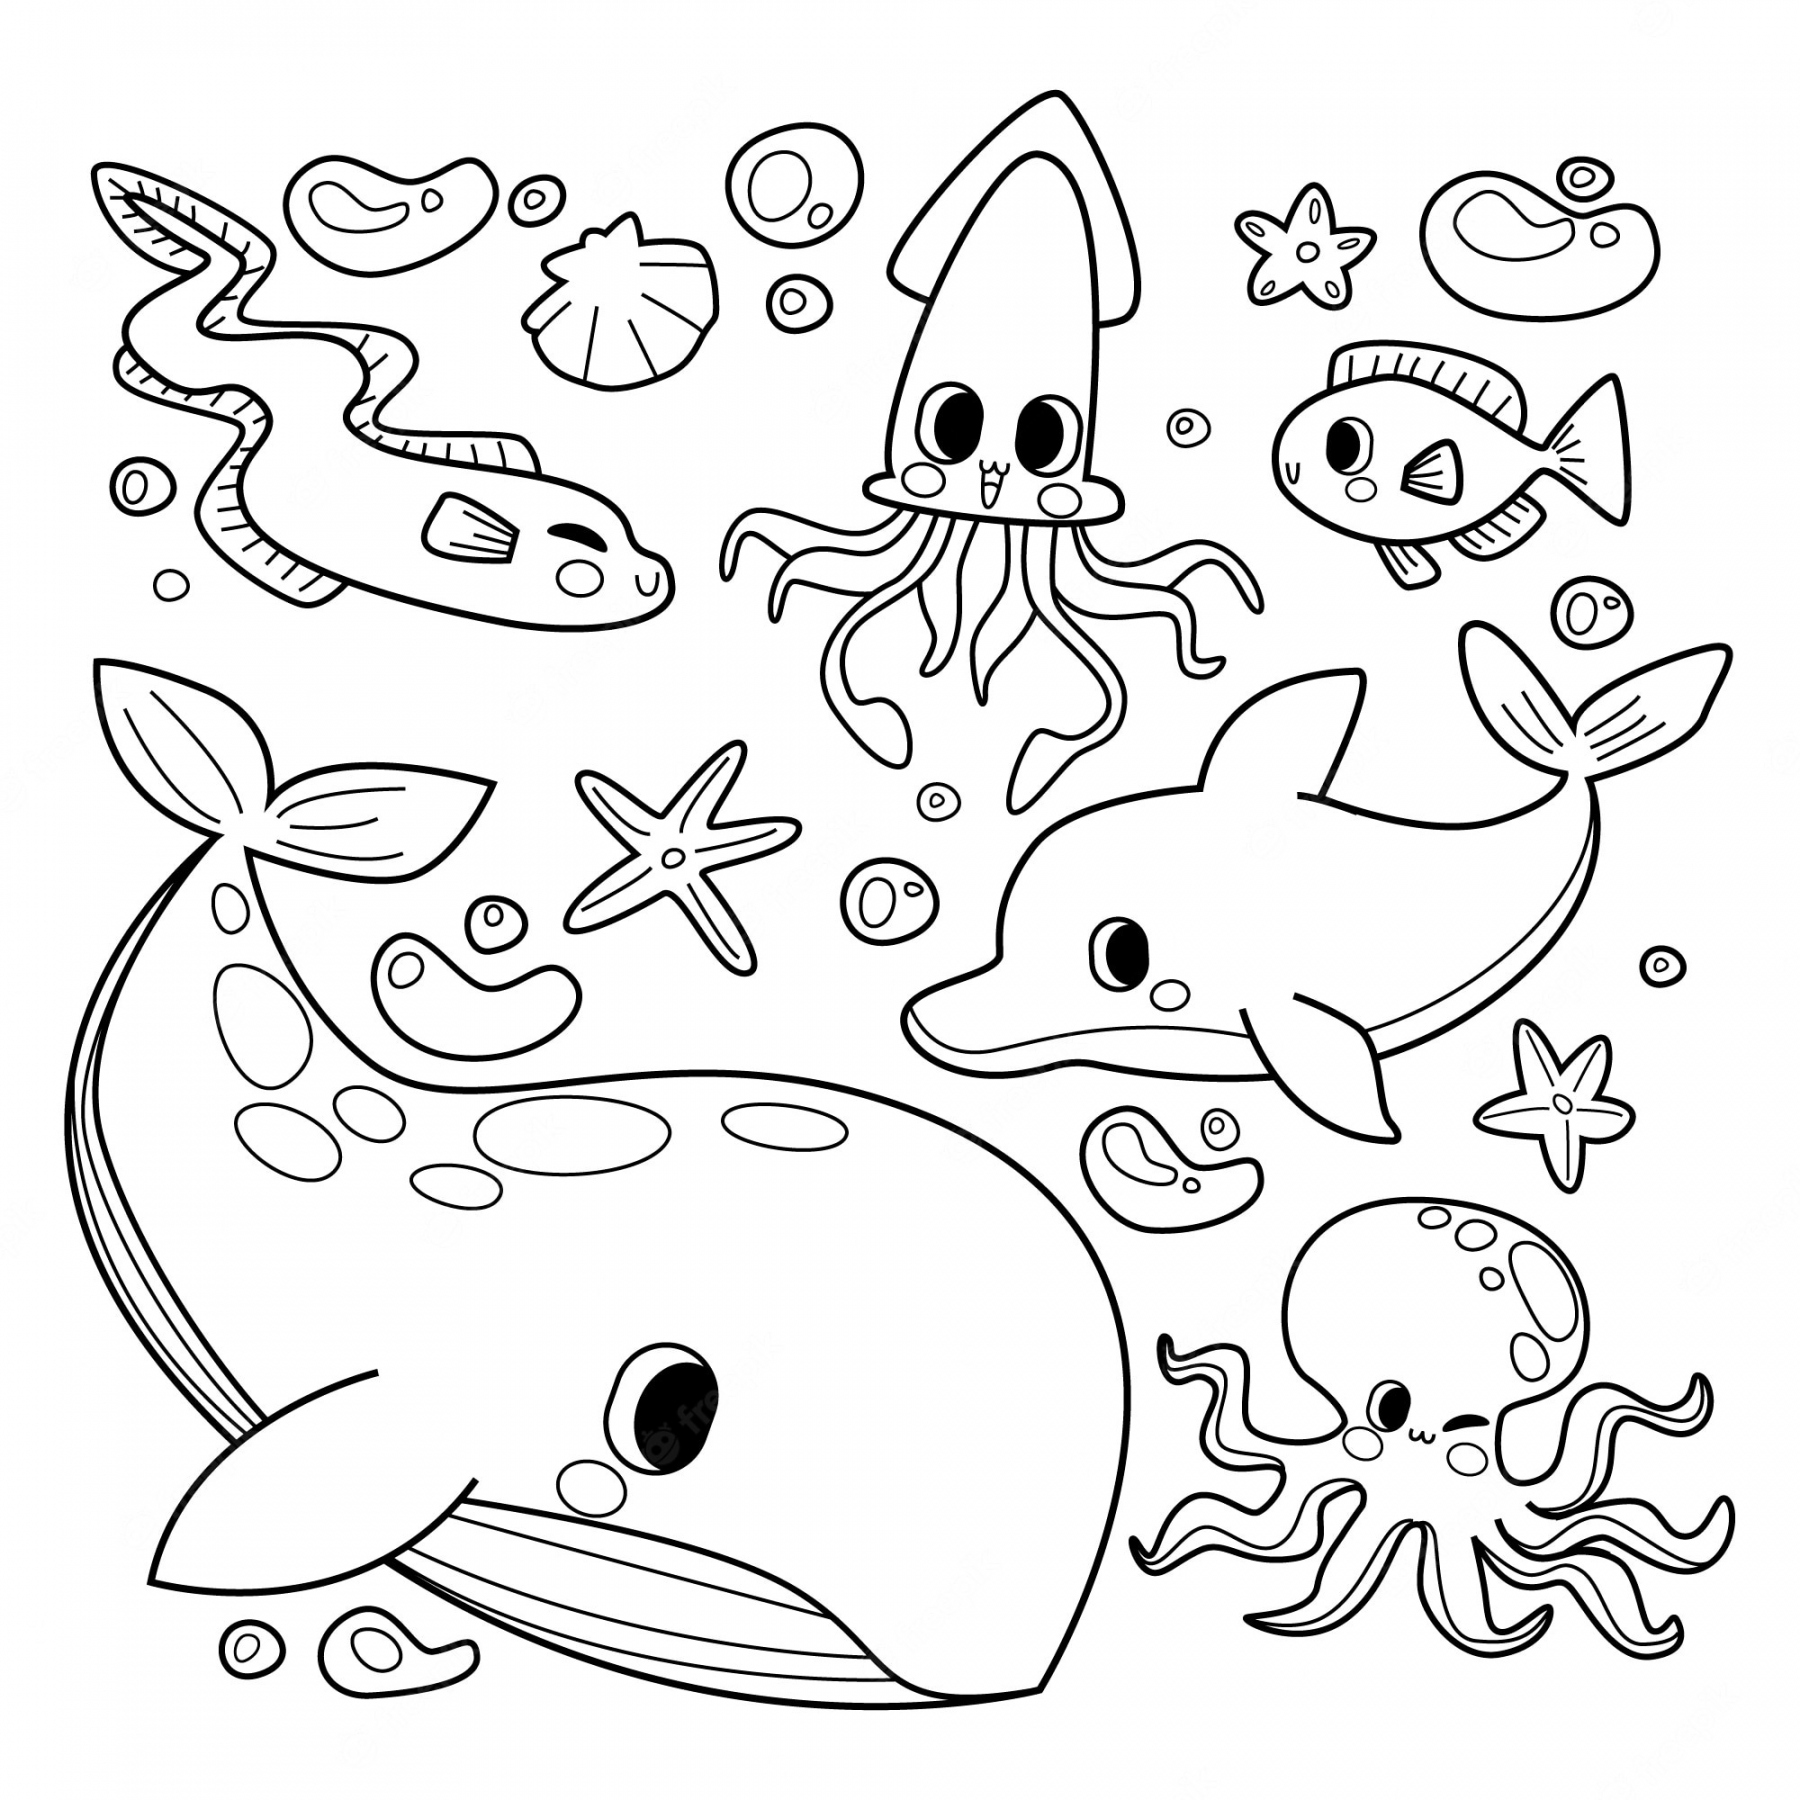 Free Printable Color Sheet - Printable - Coloring Pages Images - Free Download on Freepik